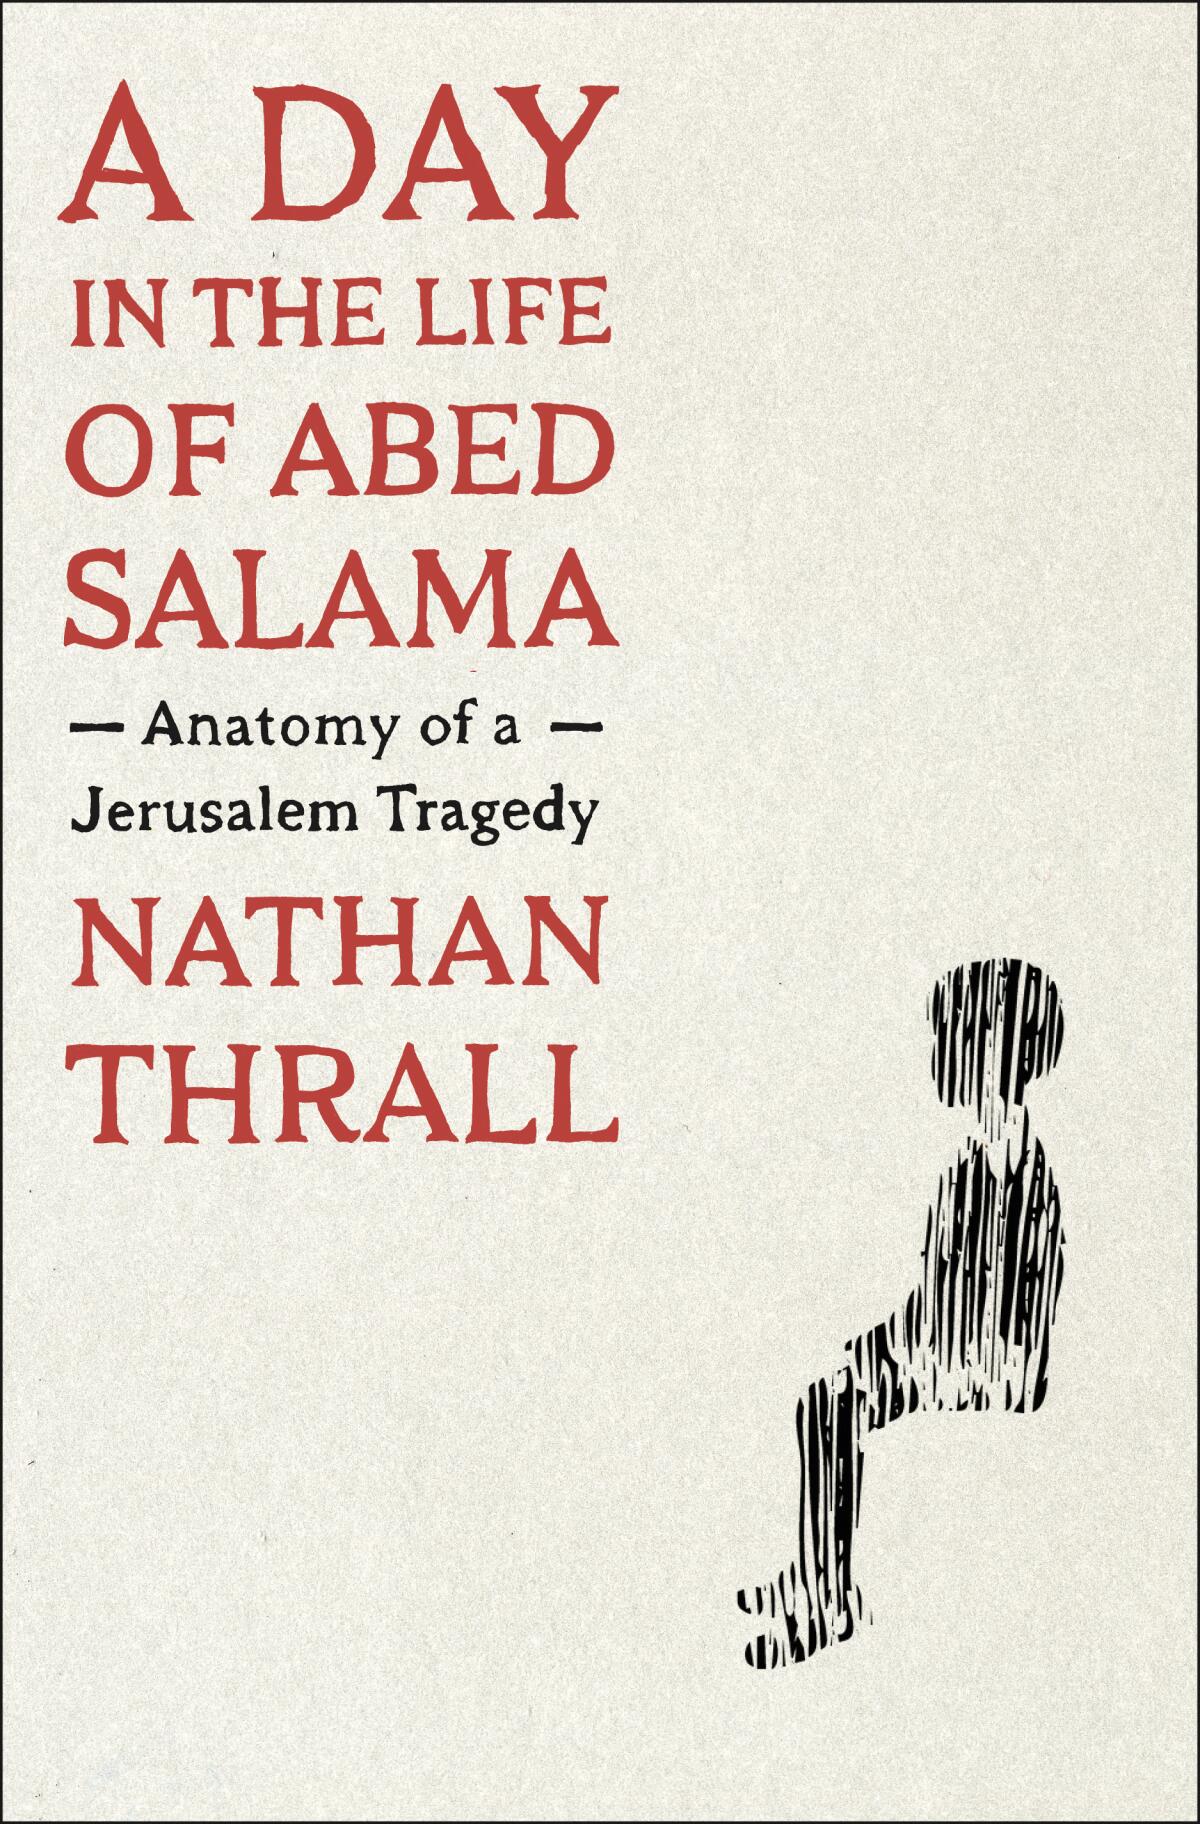 A book cover for "A Day in the Life of Amed Salama" shows a young boy drawn as sketchy shadow against a white background.